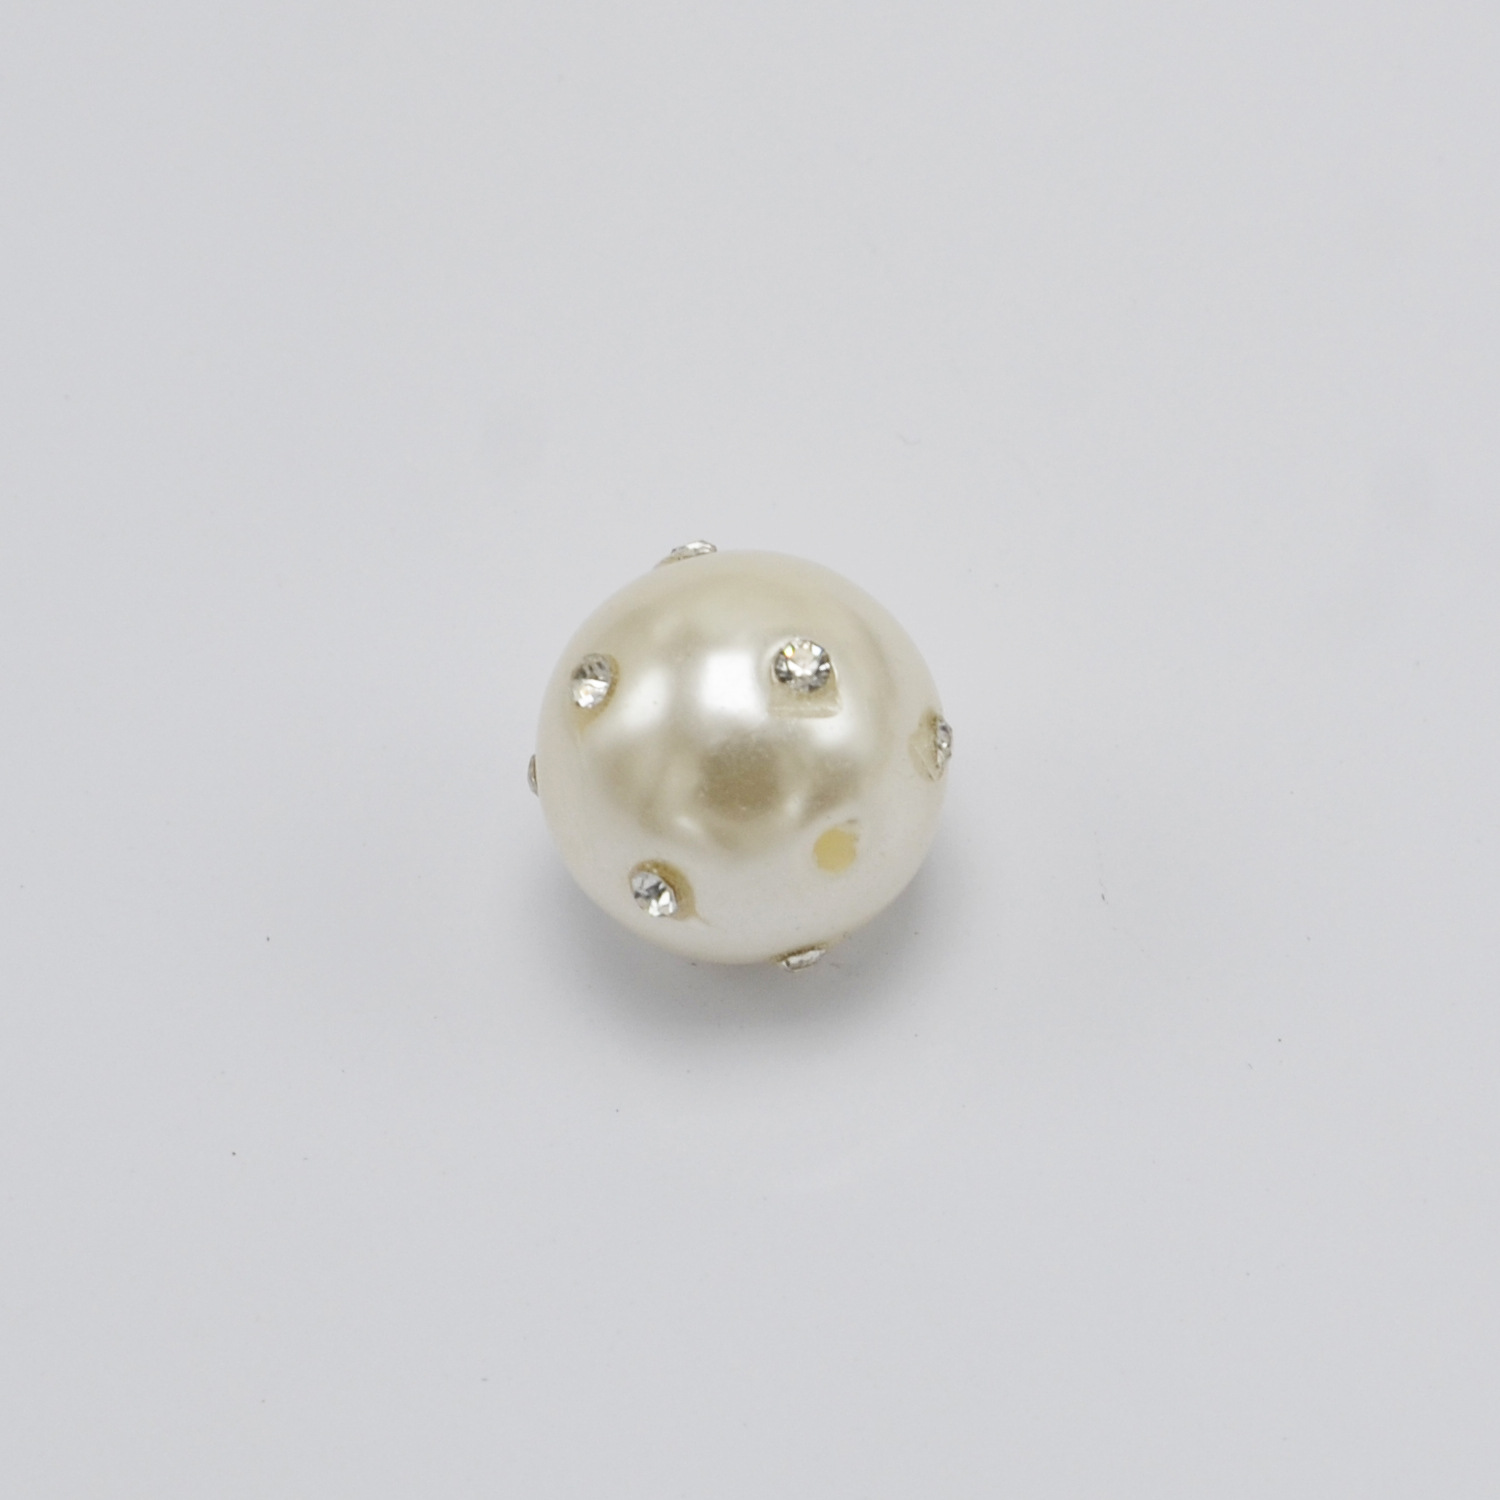 2:The ball perforated with five diamonds